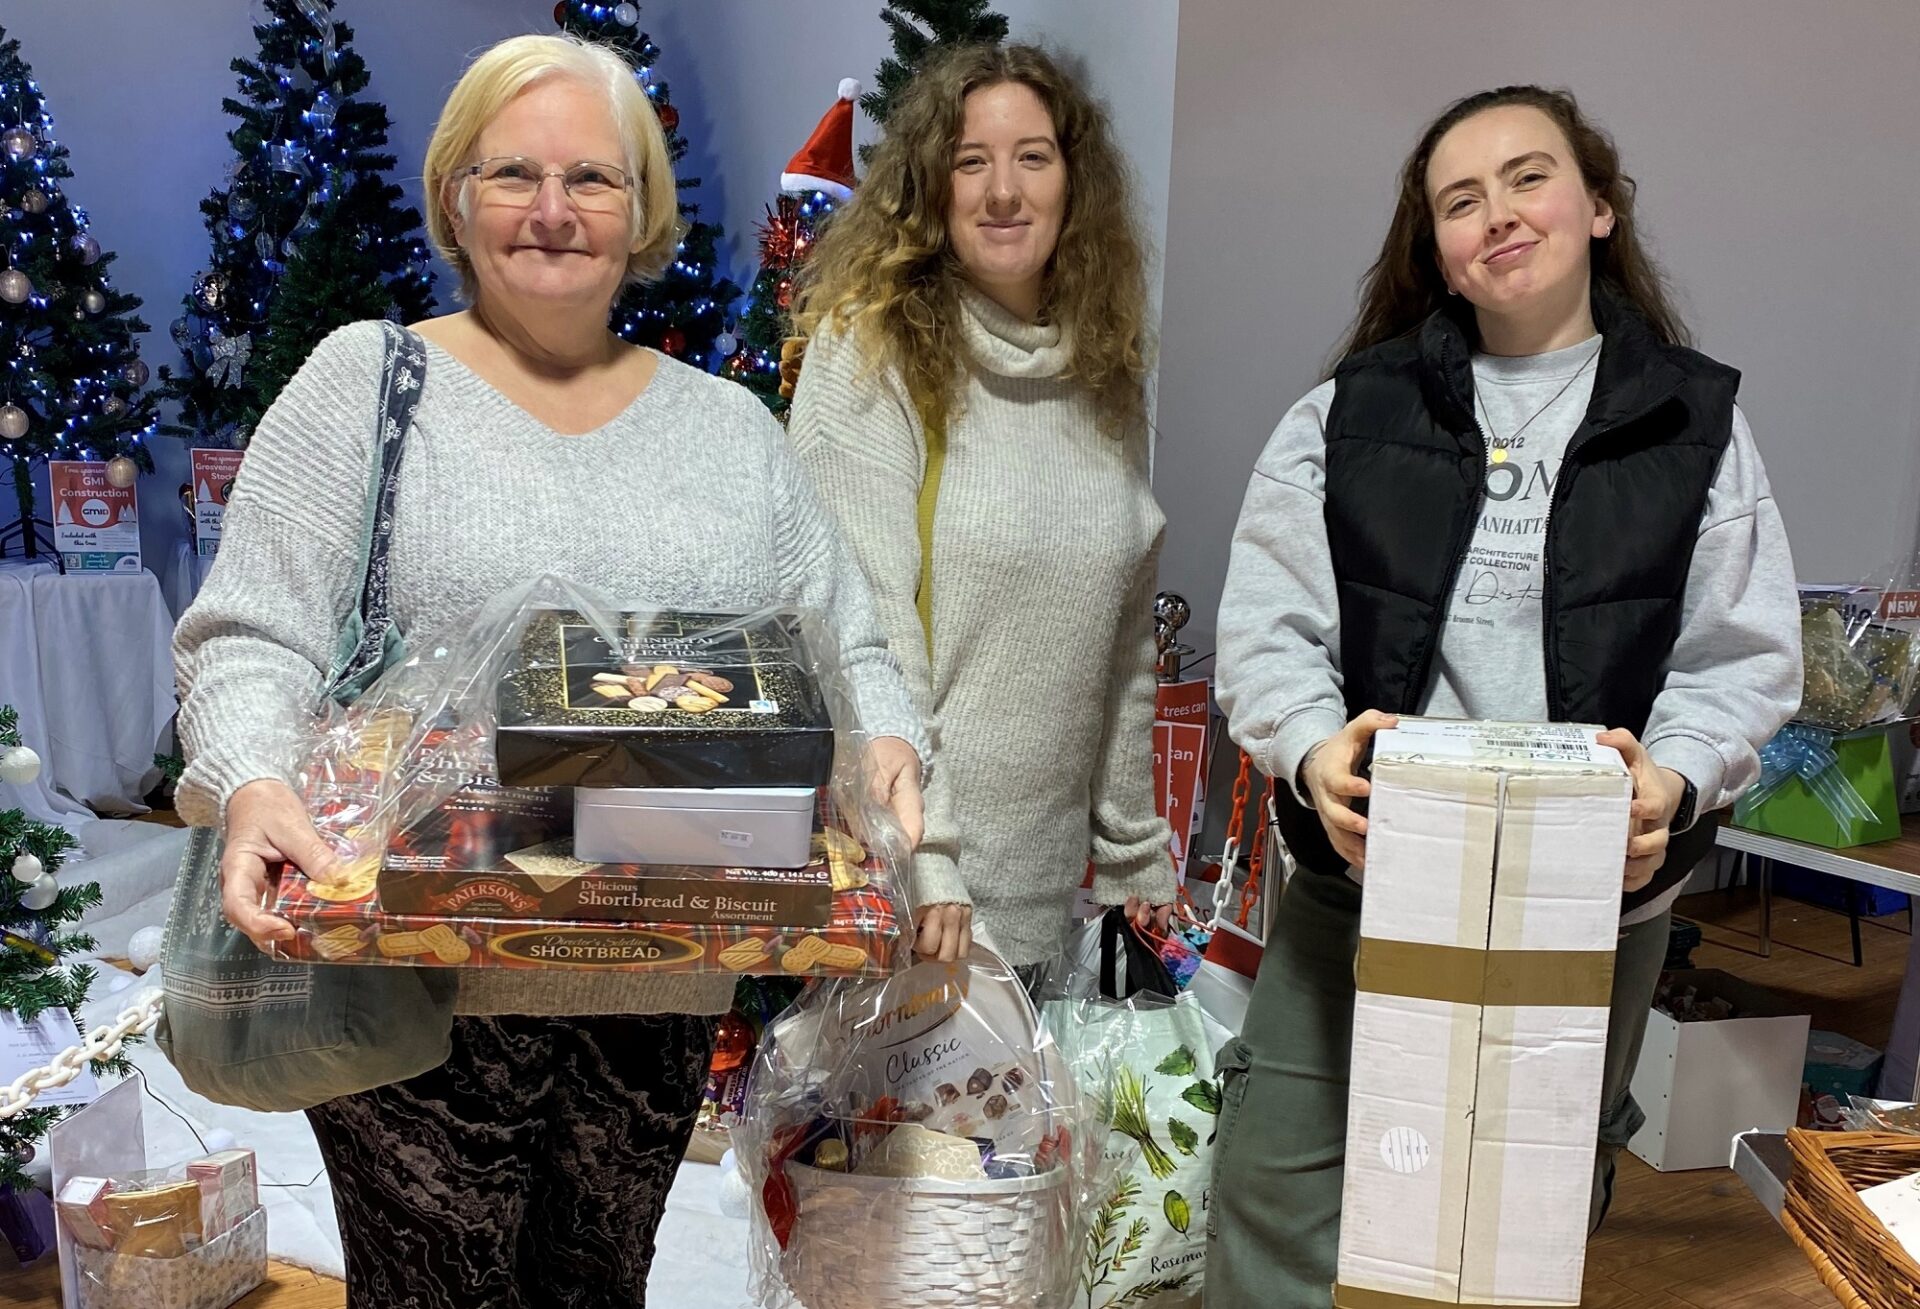 Three women stood holding hampers and boxes in front of Christmas trees